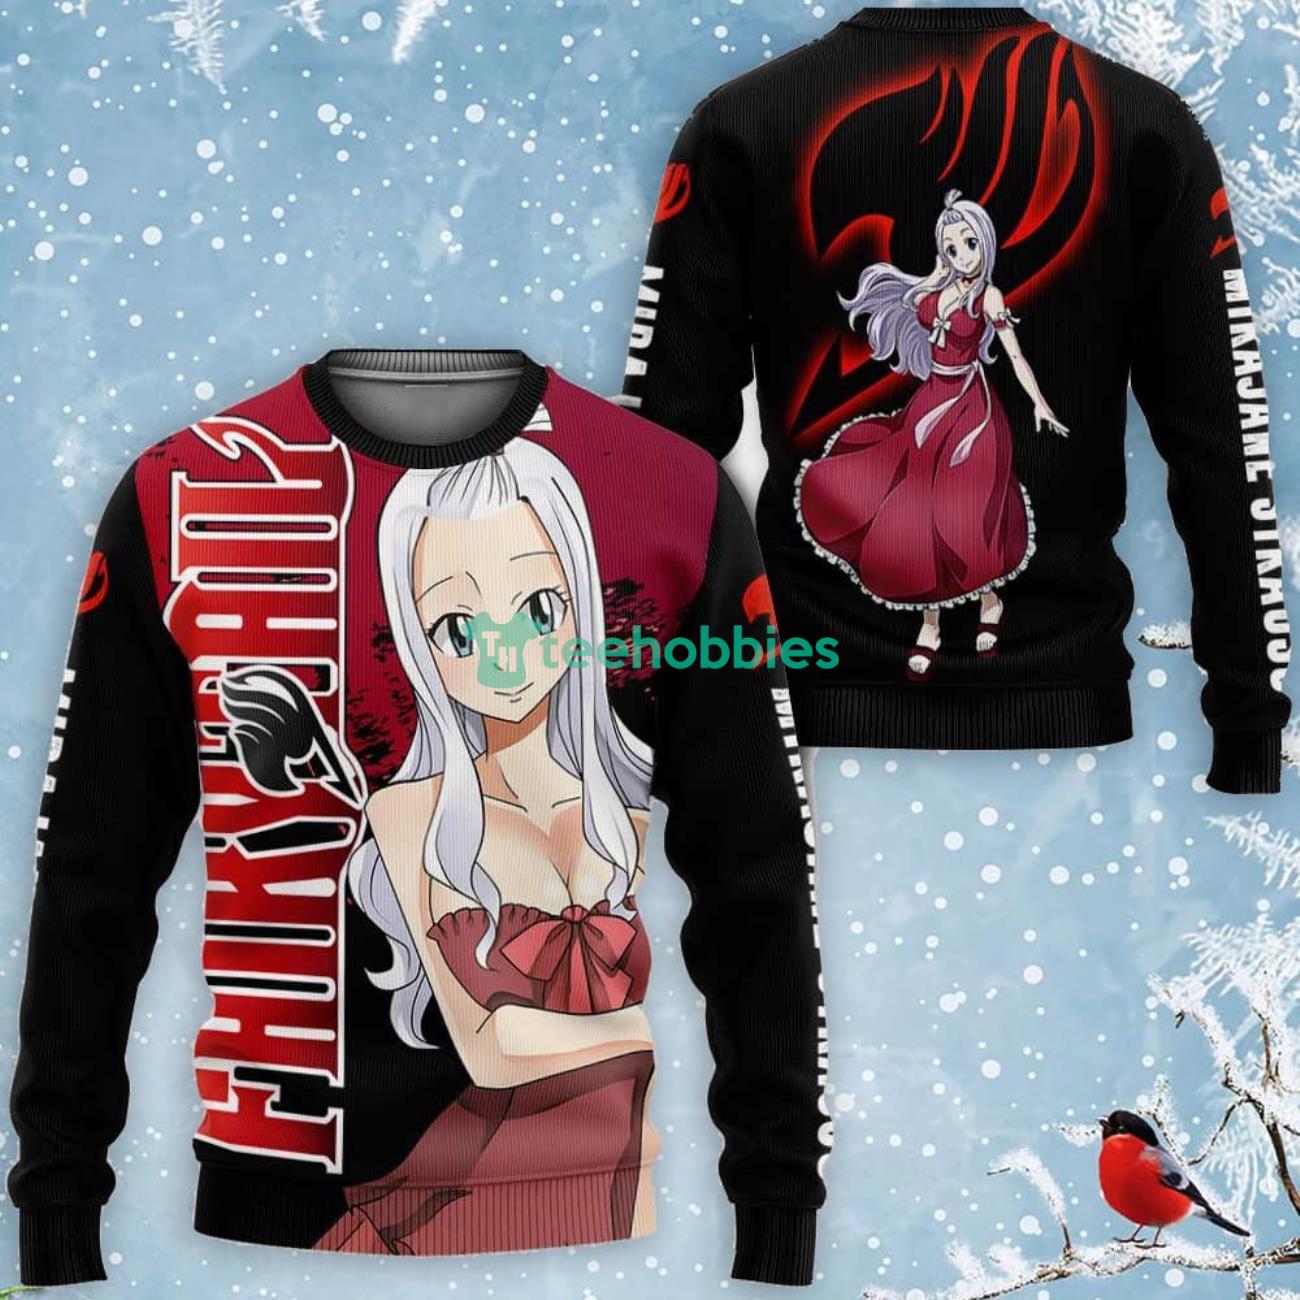 Mirajane Strauss All Over Printed 3D Shirt Fairy Tail Anime Fans Ian Product Photo 2 Product photo 2